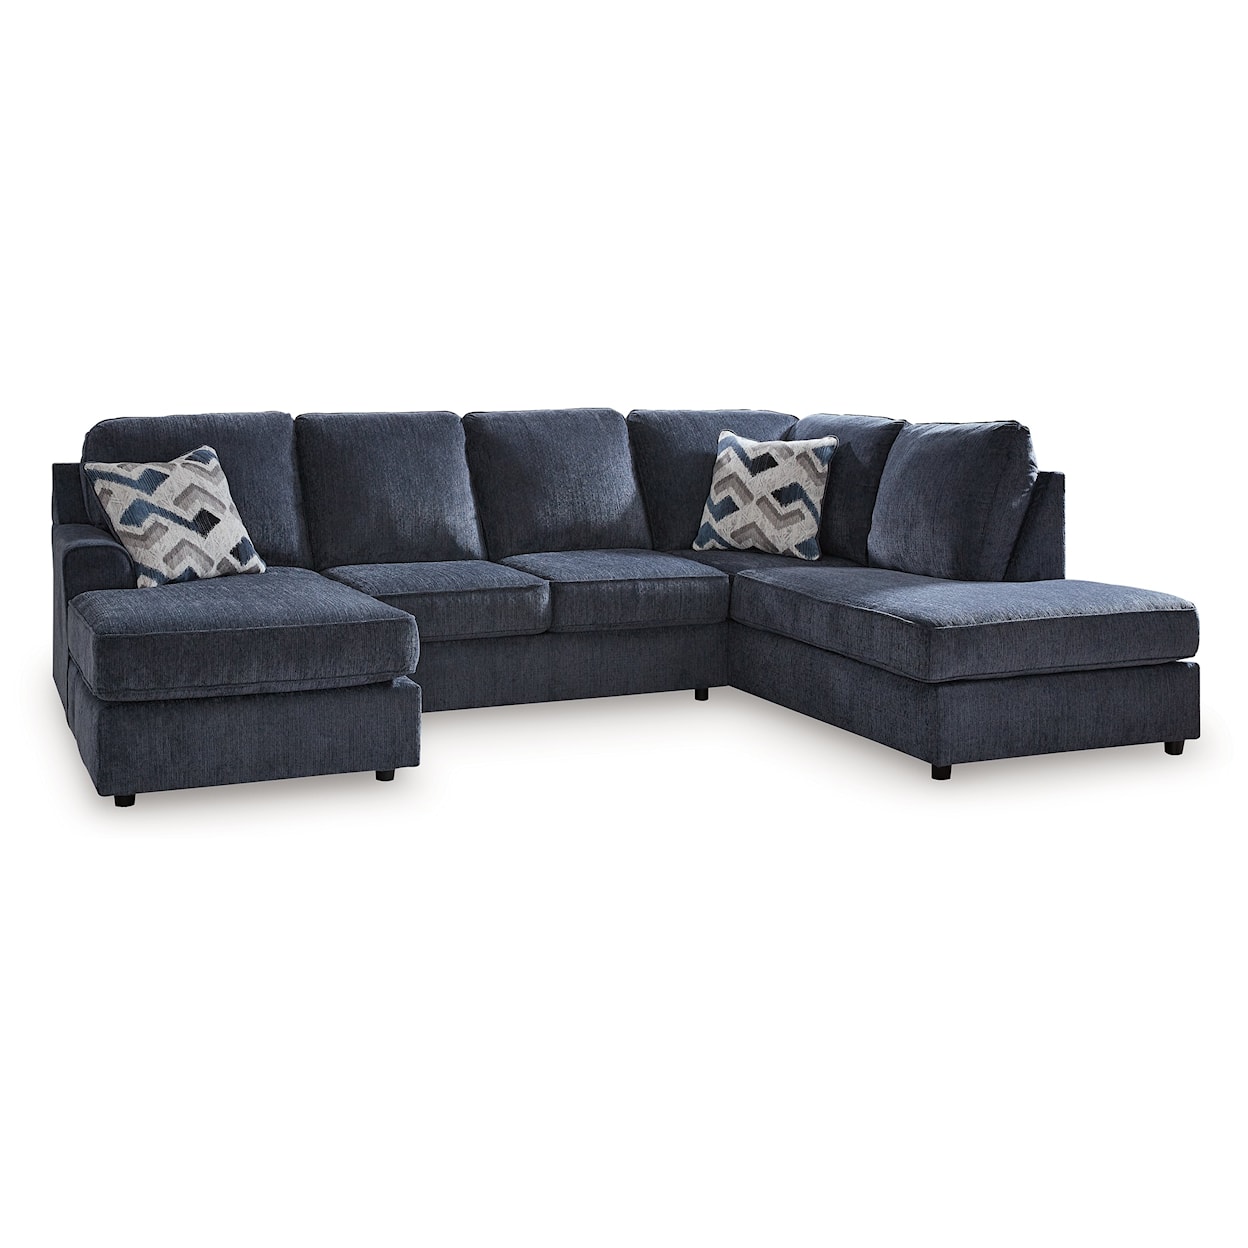 Signature Design by Ashley Albar Place 2-Piece Sectional